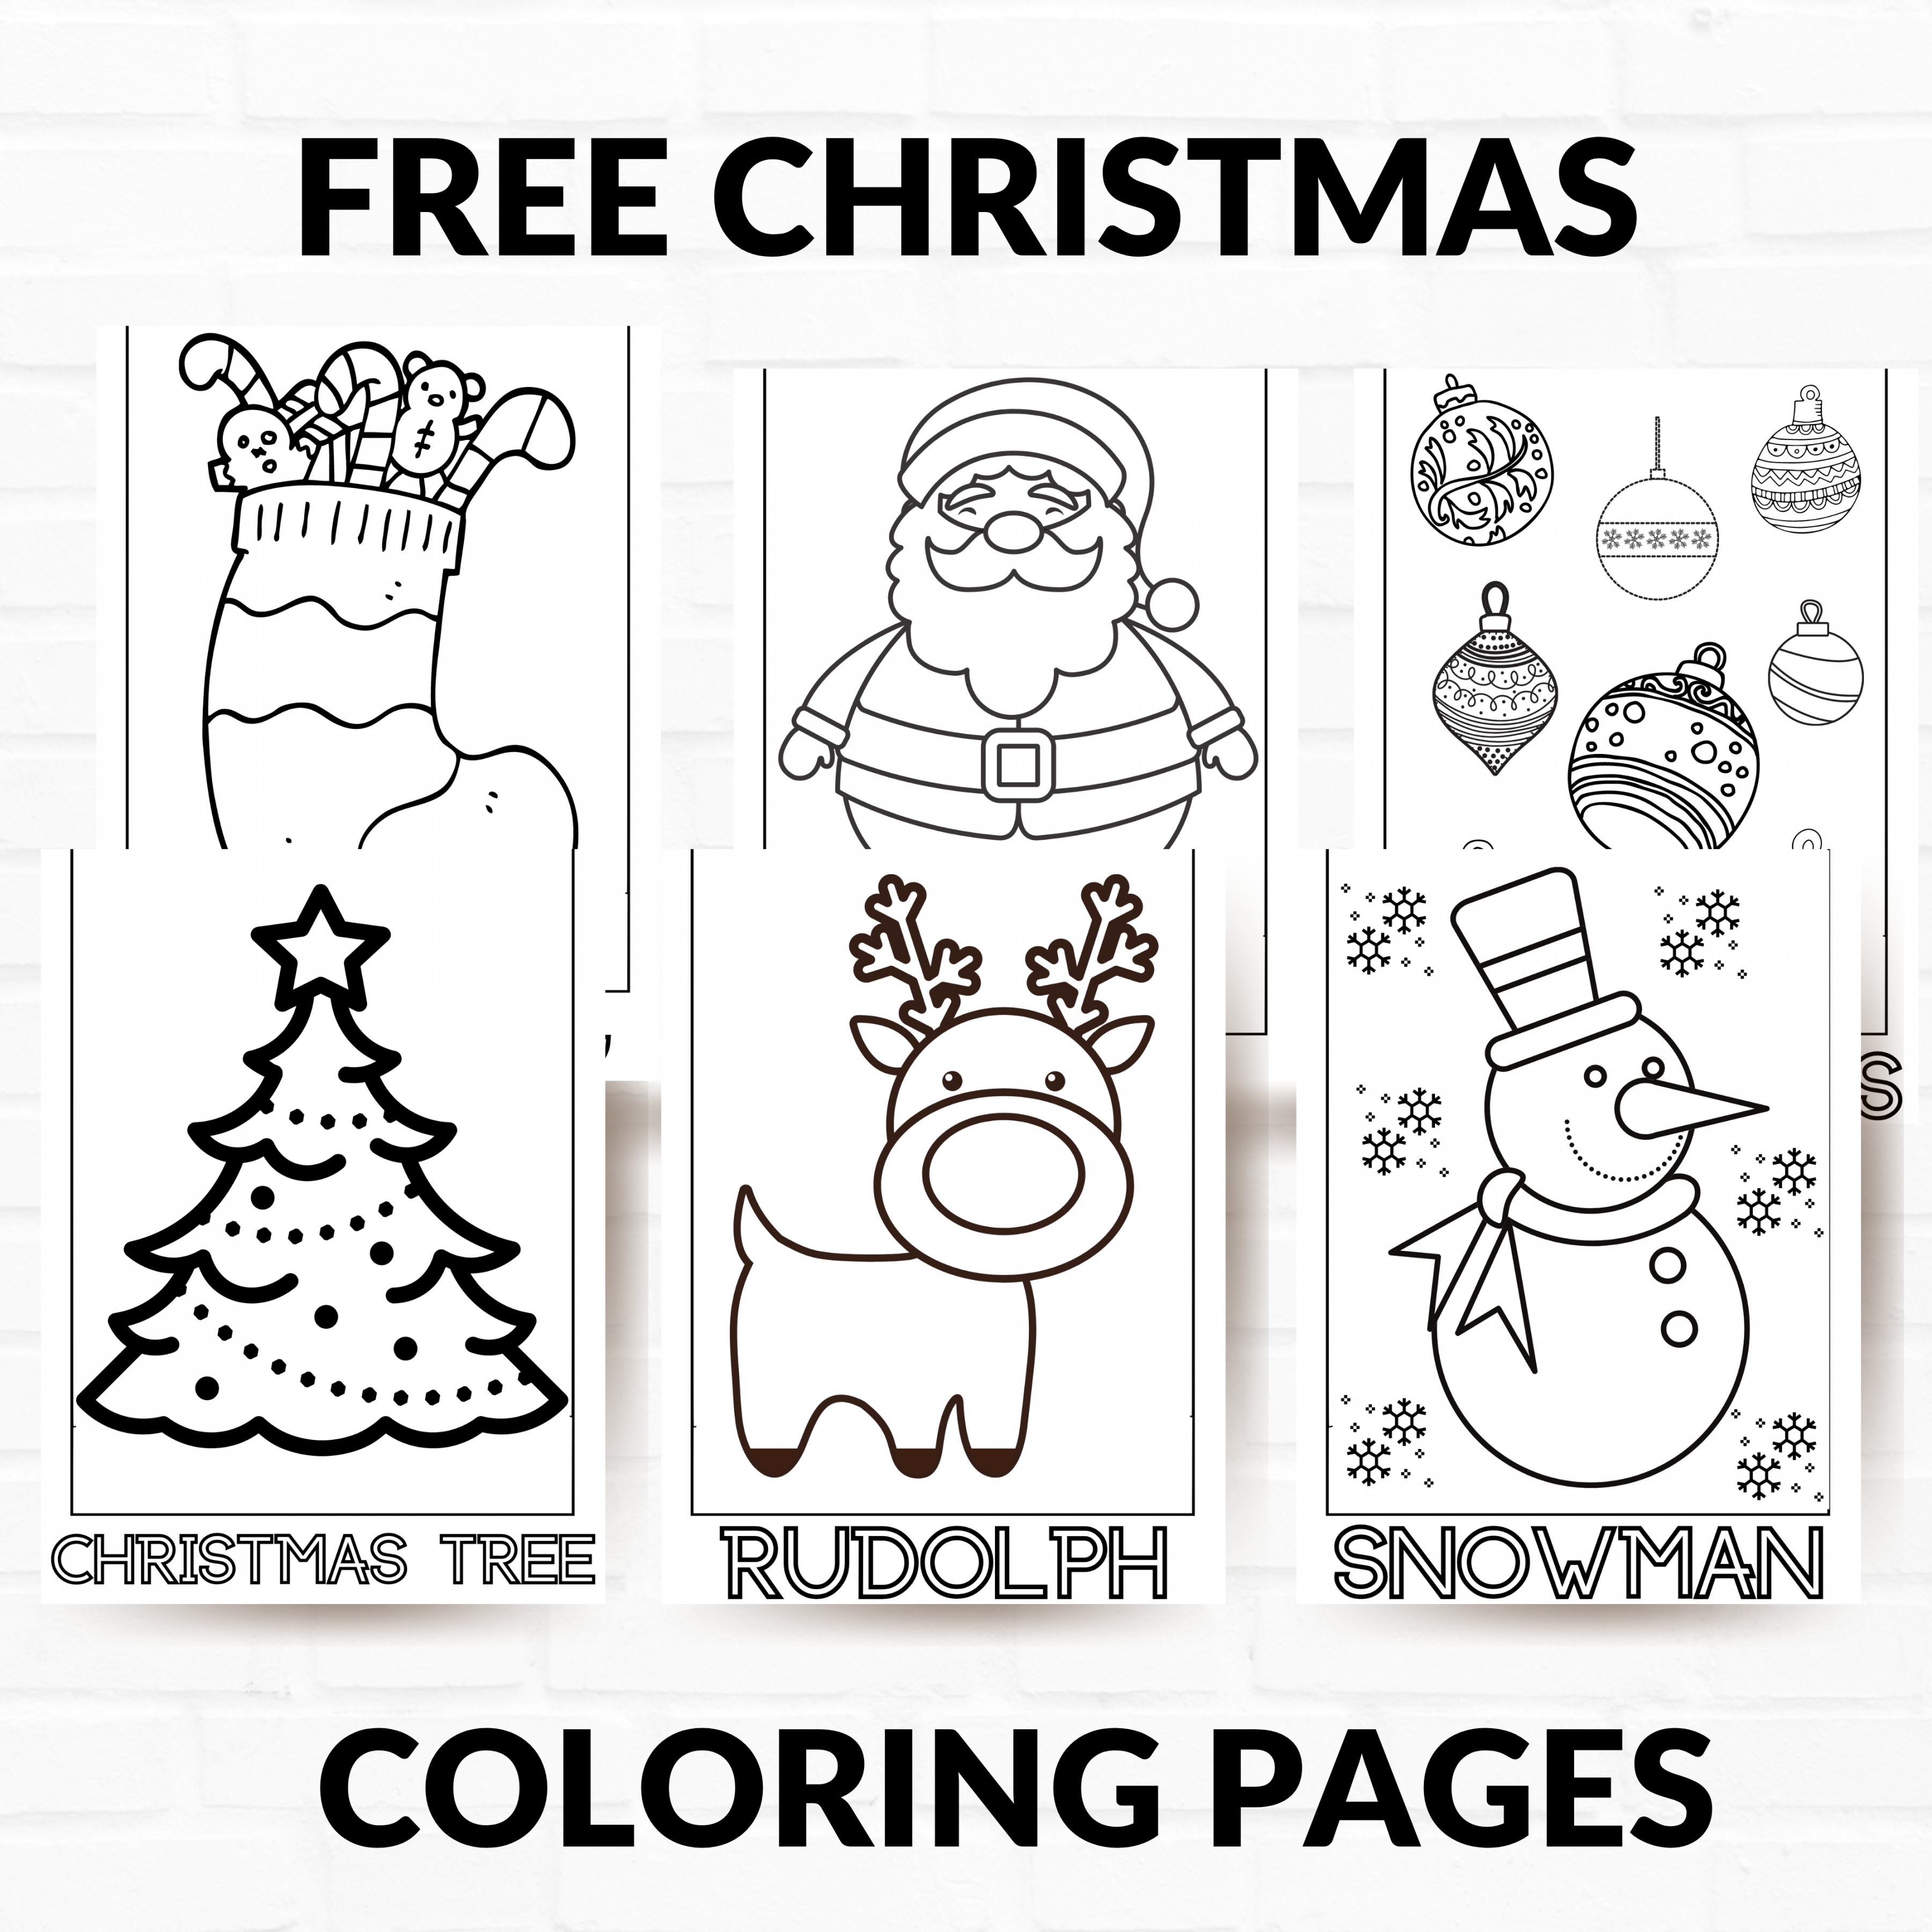 Printable Christmas Coloring Pages Free - Printable - Free Printable Christmas Coloring Pages - About a Mom